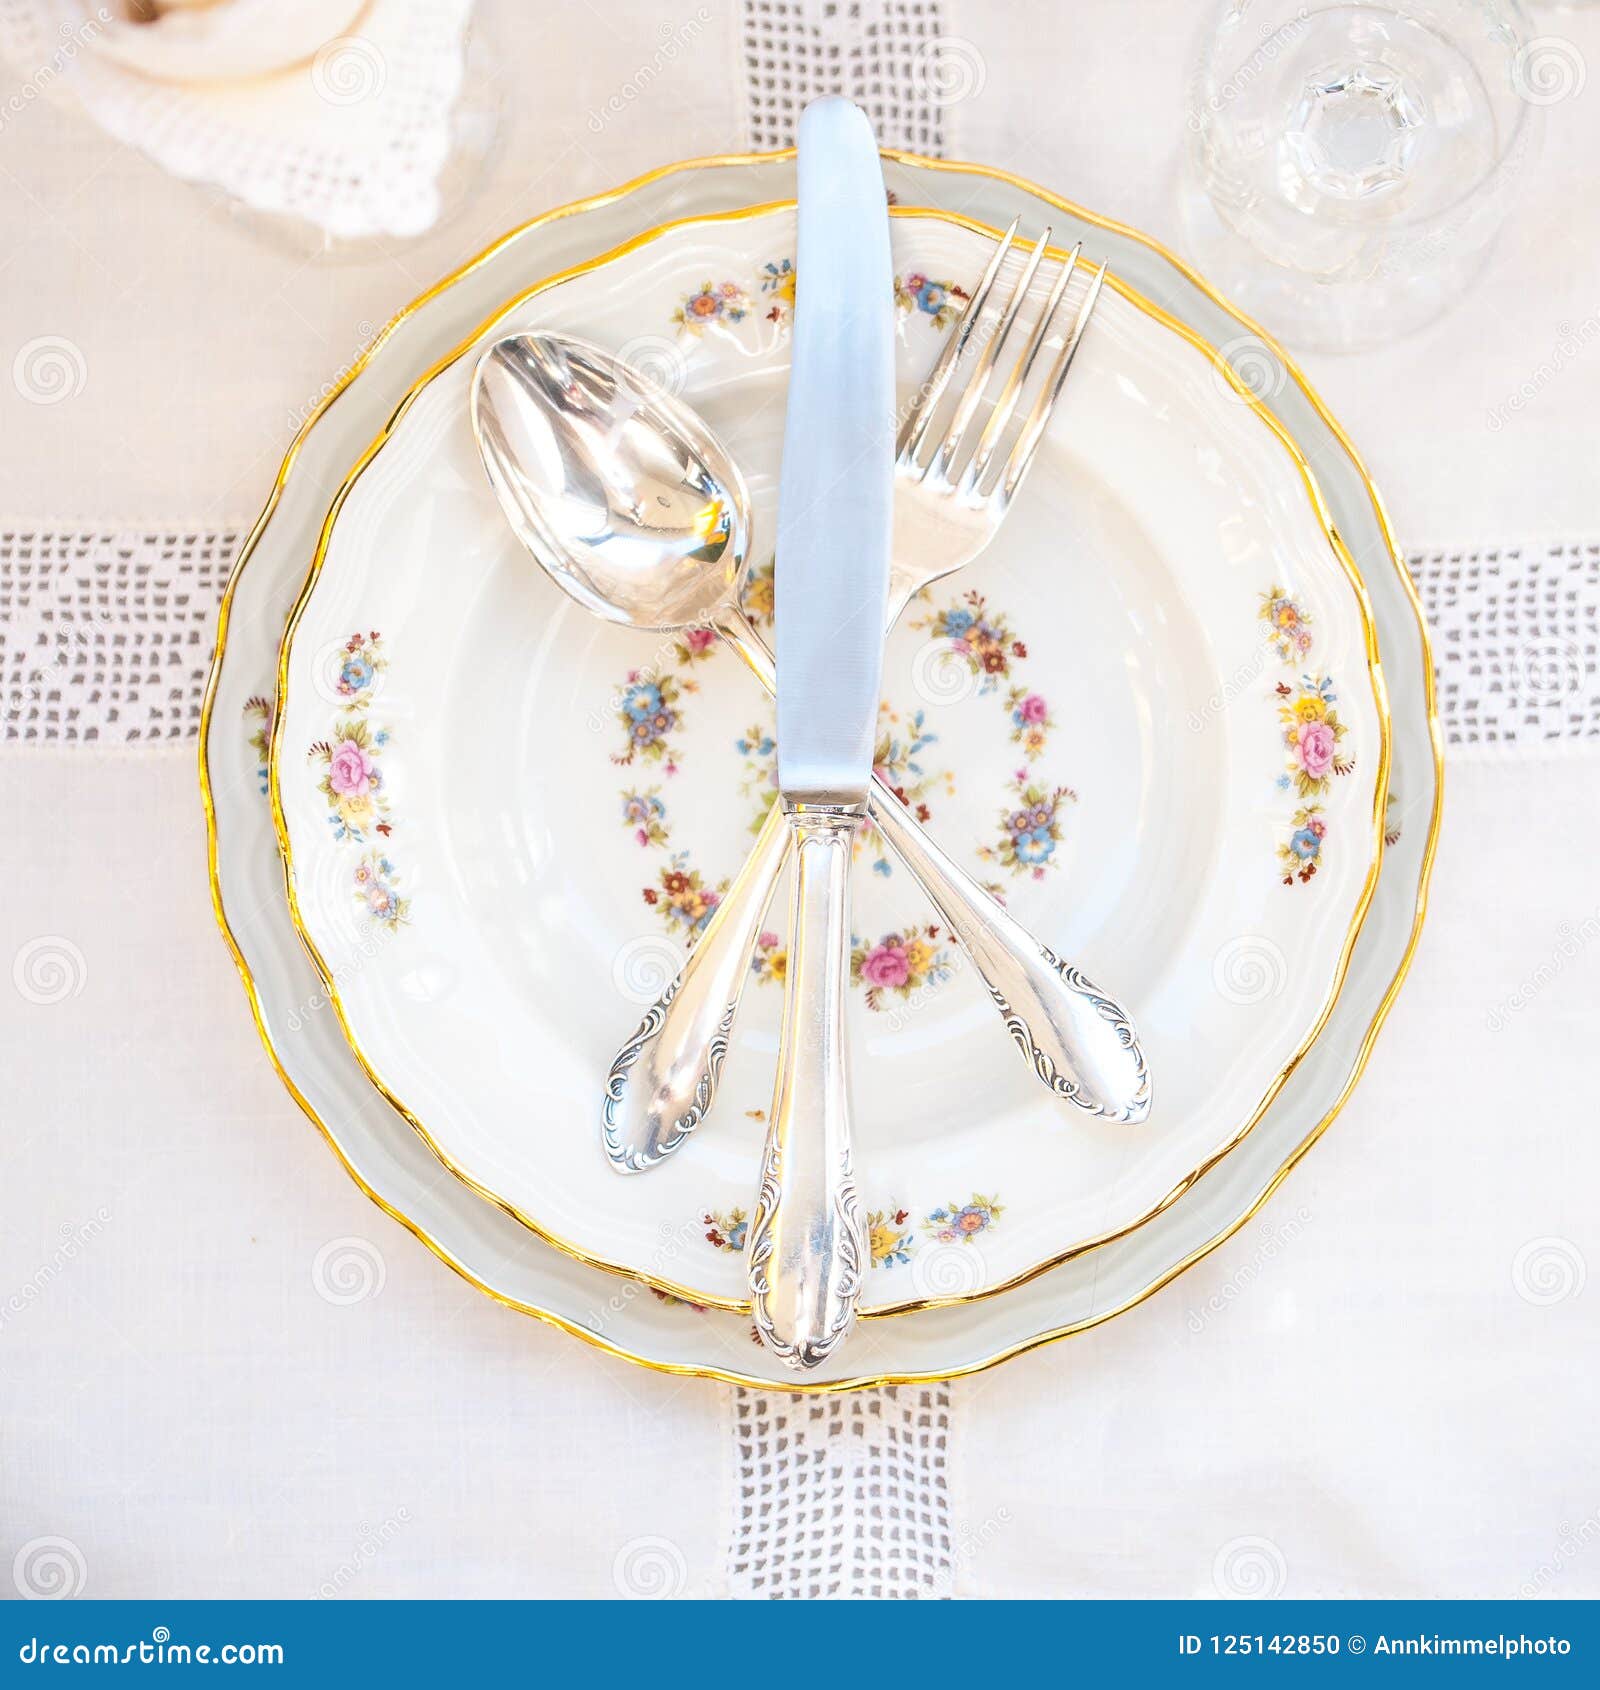 Flatlay with Porcelain Plates and Silver Cutlery with Lace Napkins on ...